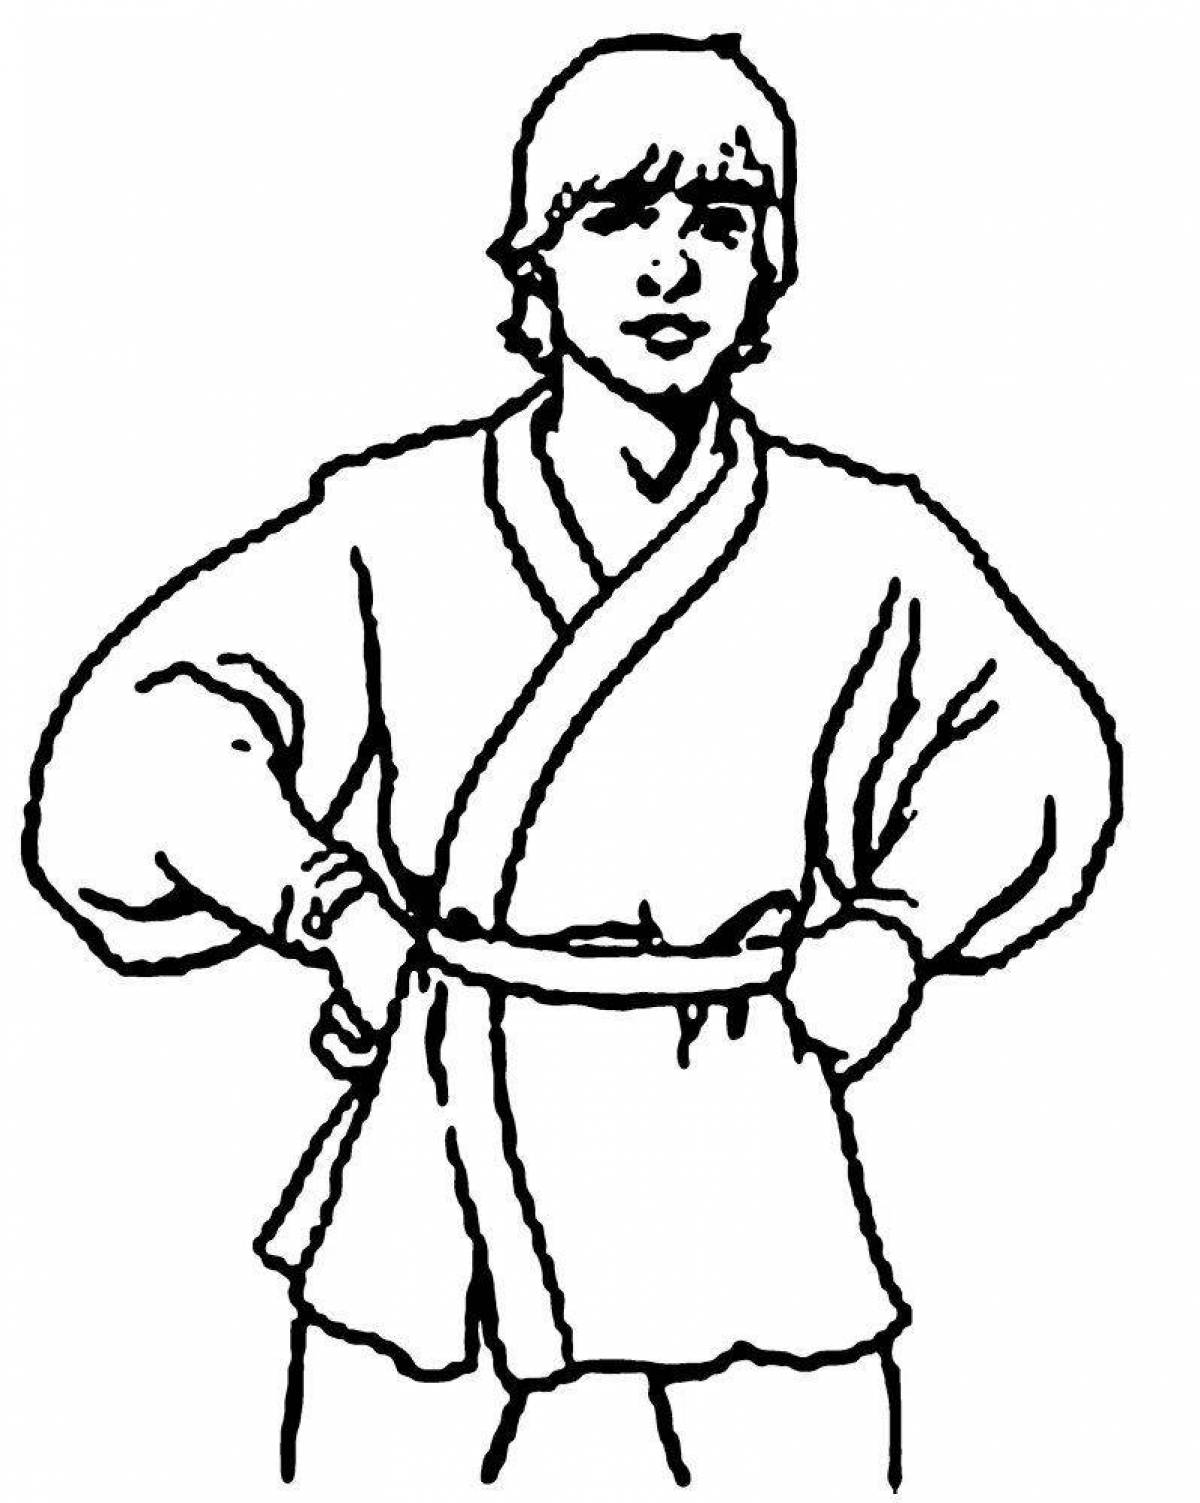 Charming karate for kids coloring book